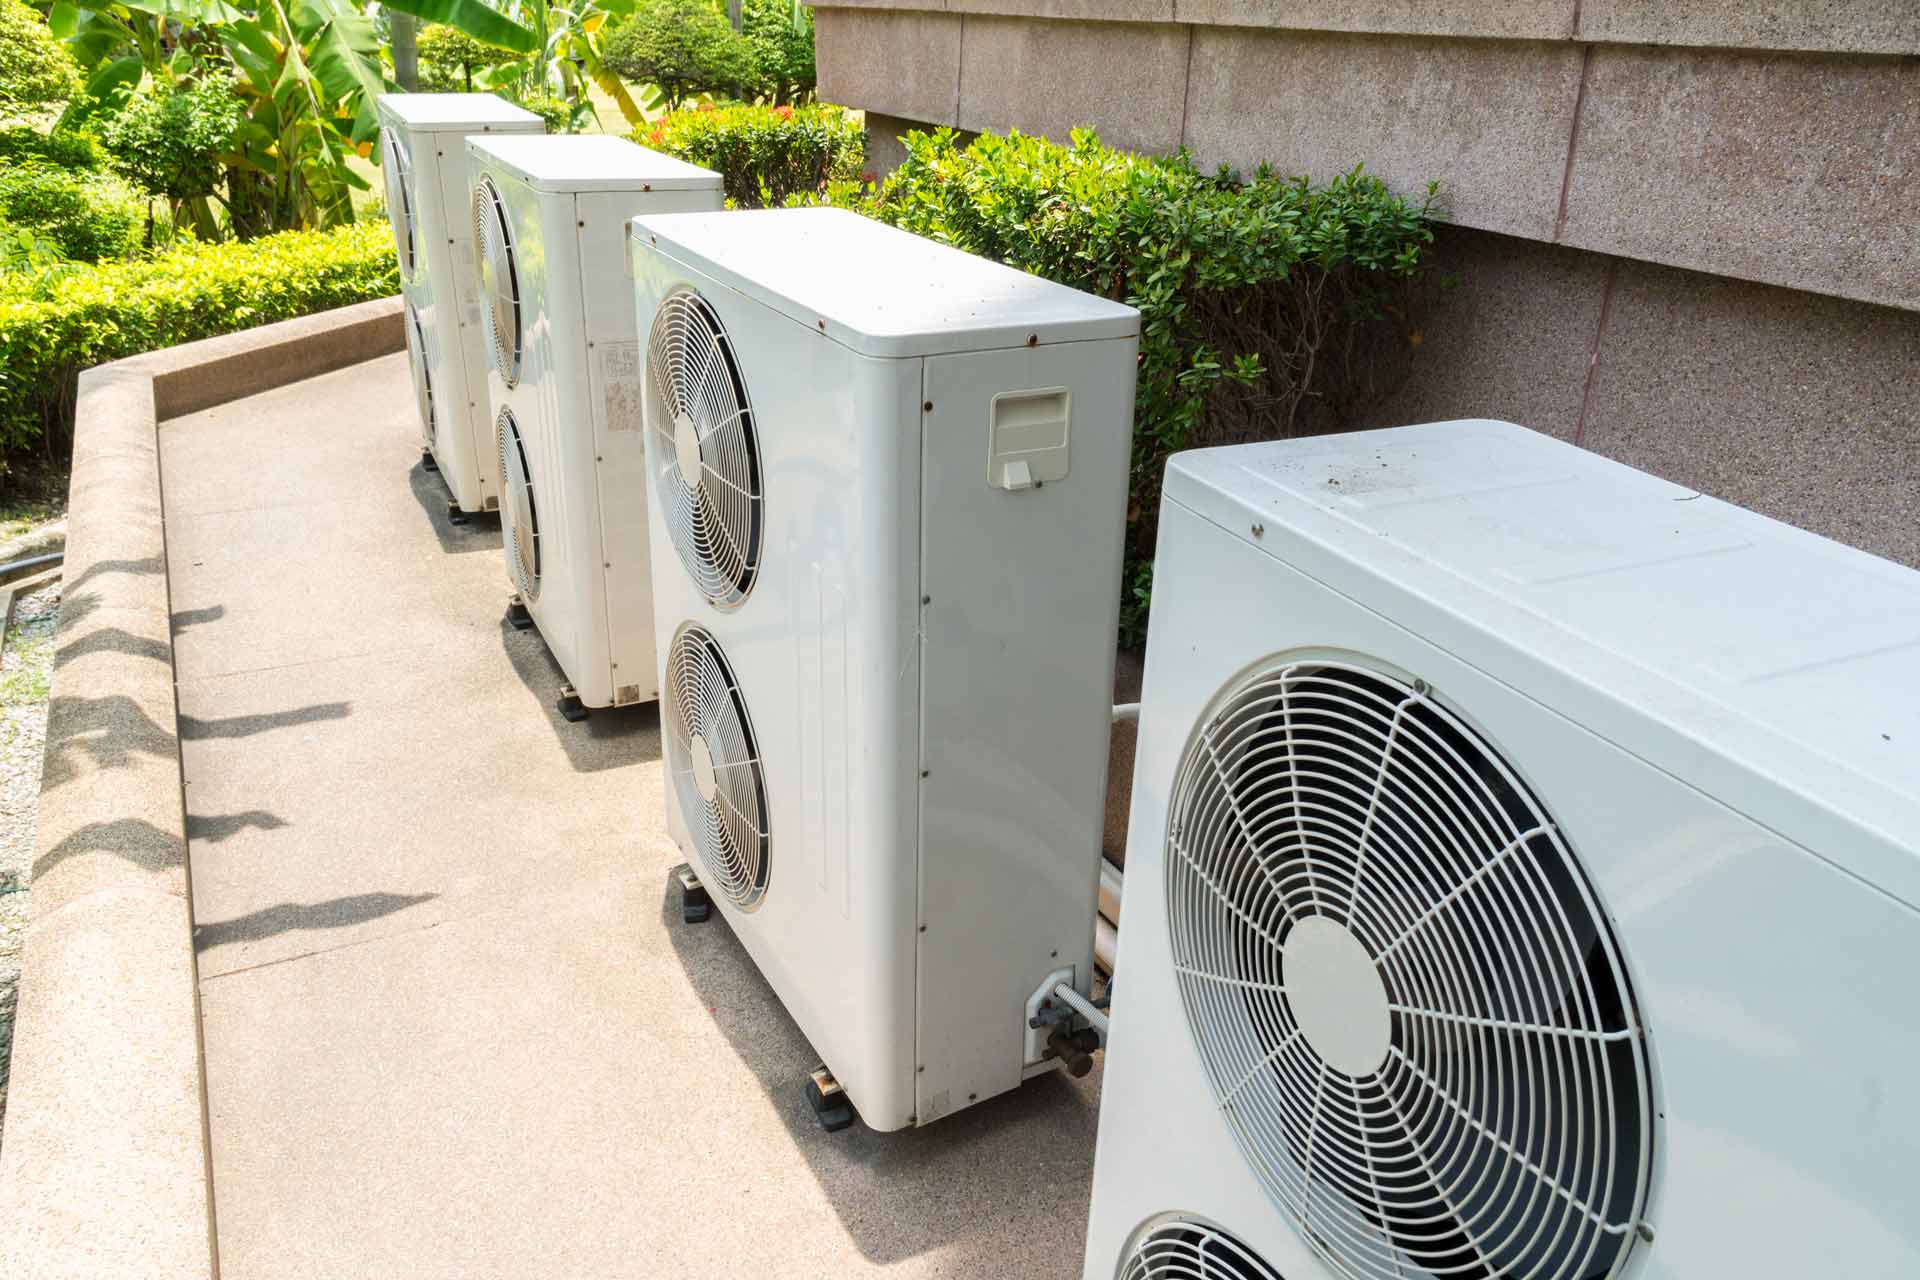 Air Conditioning Units Outside A Building